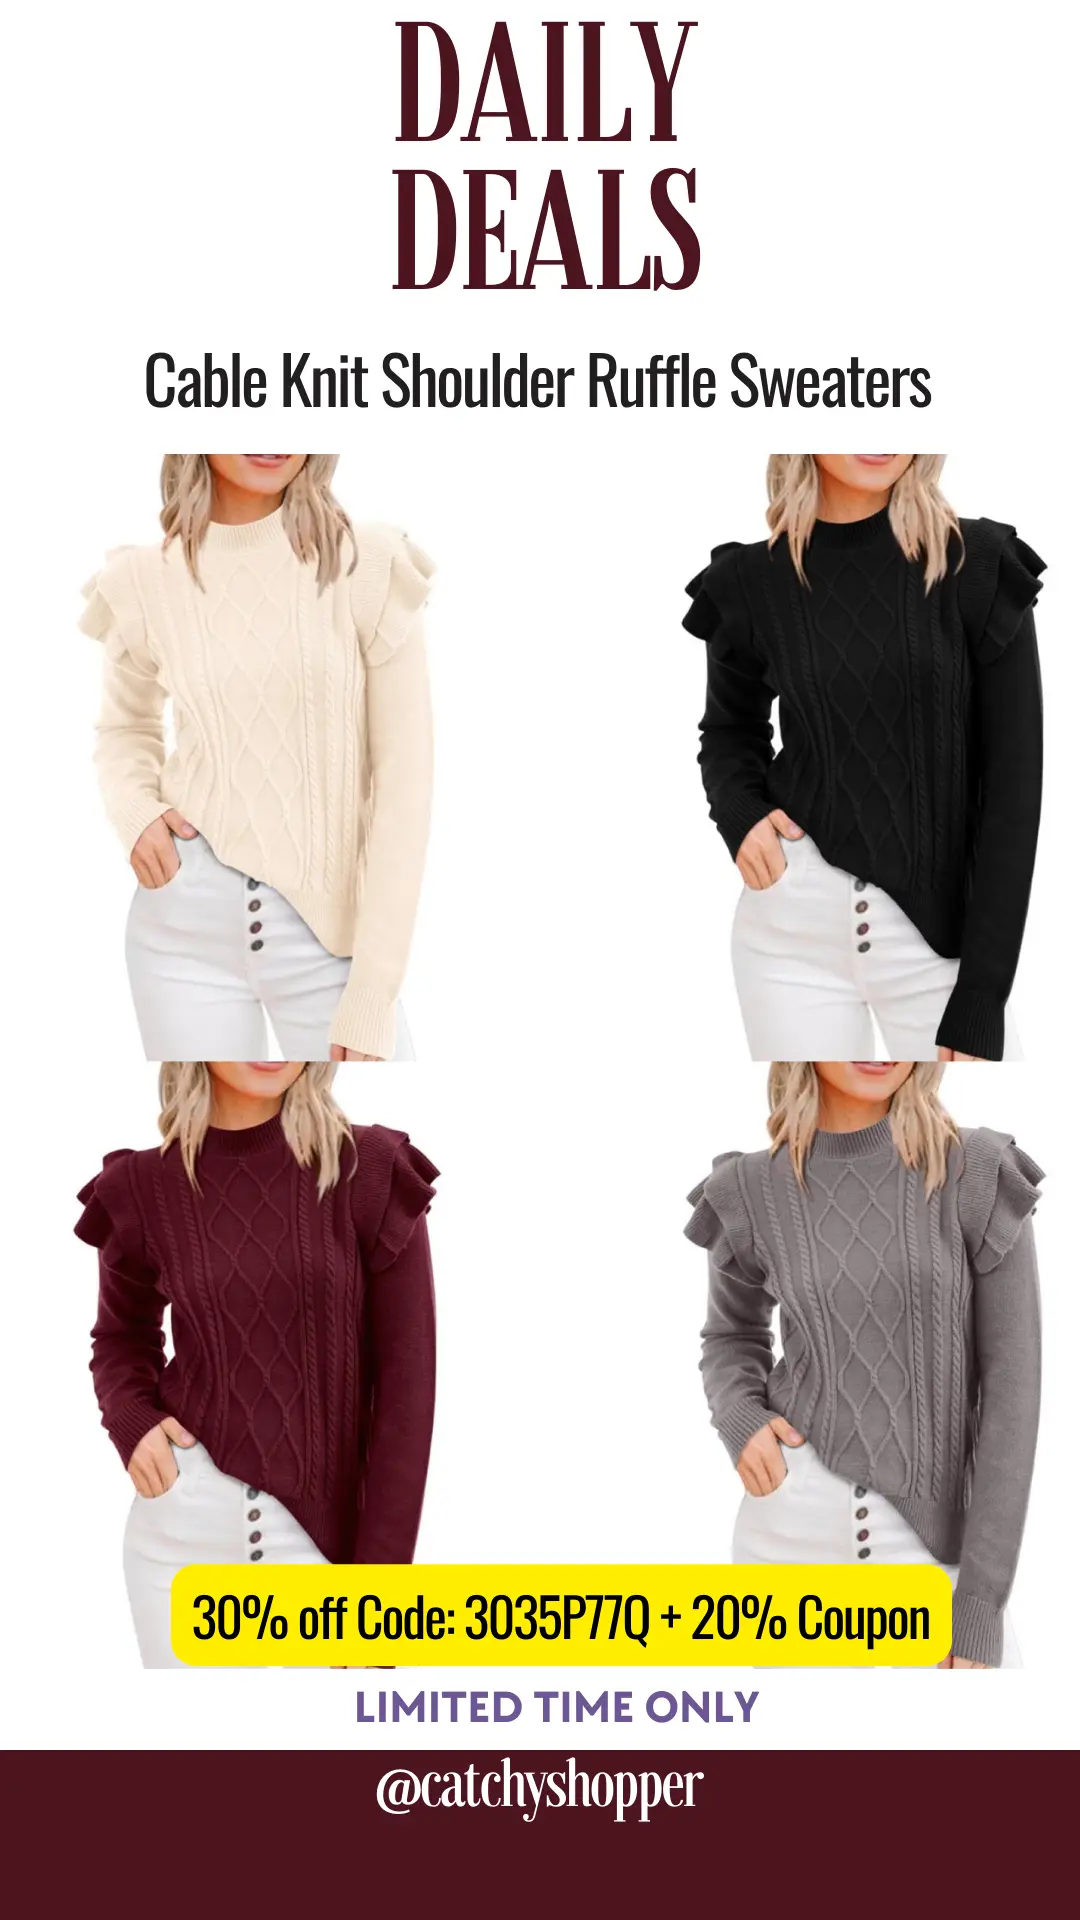 Cable Knit Shoulder Ruffle Sweaters